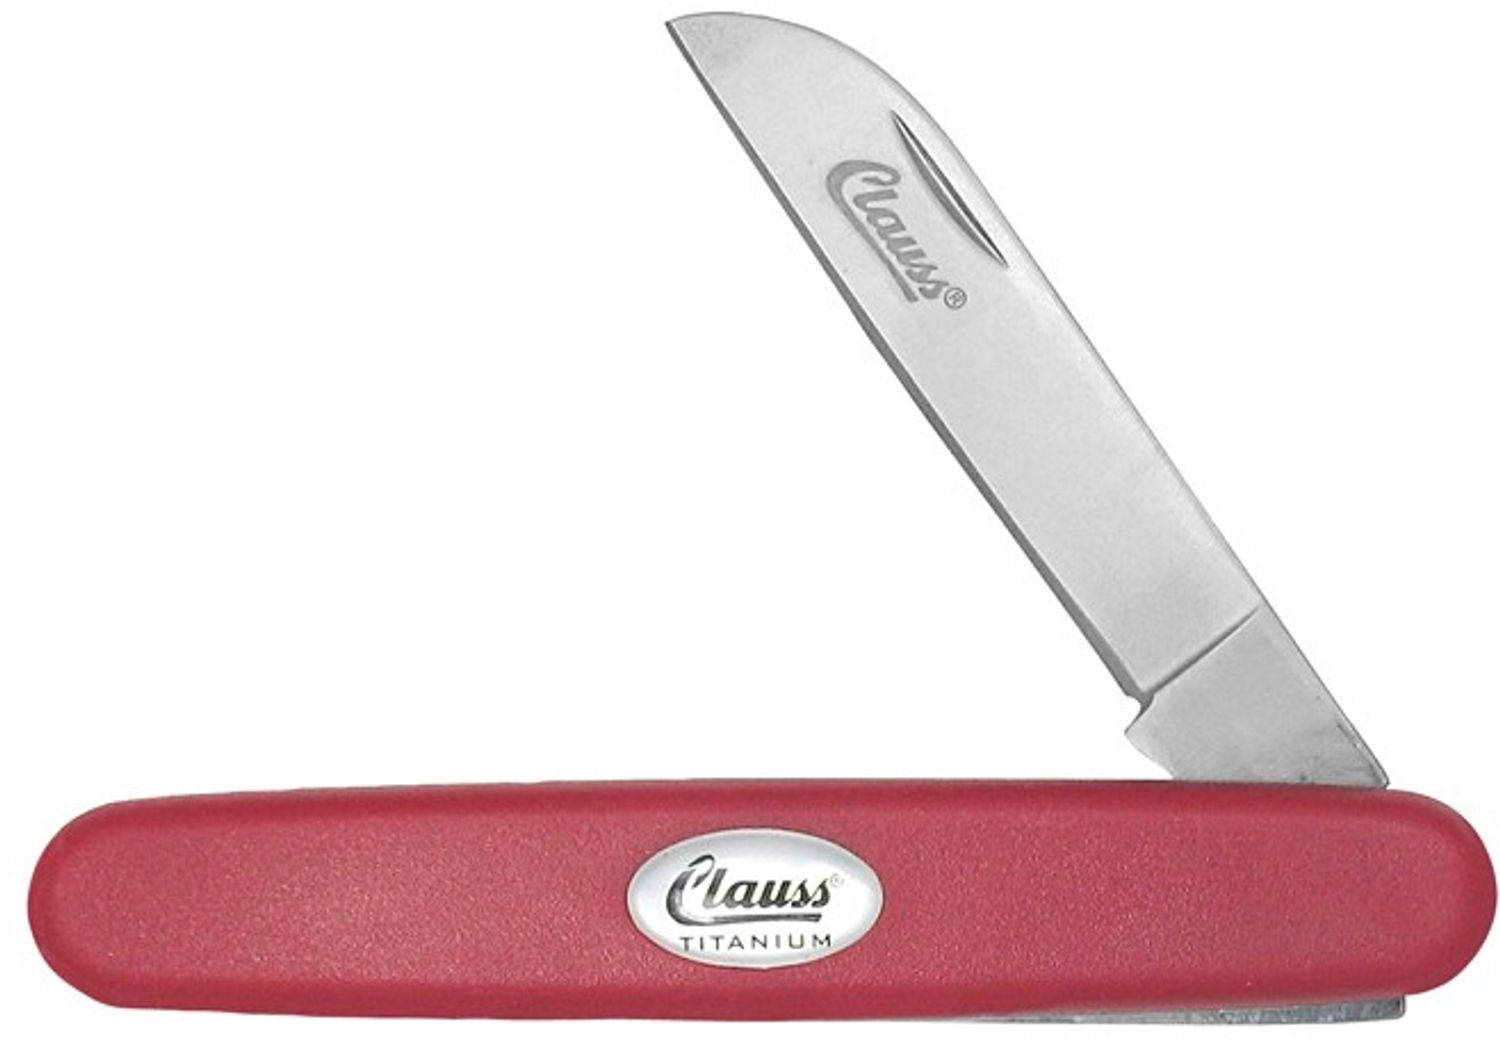  Clauss 18424 fixed blade Floral Knives, Comes in a